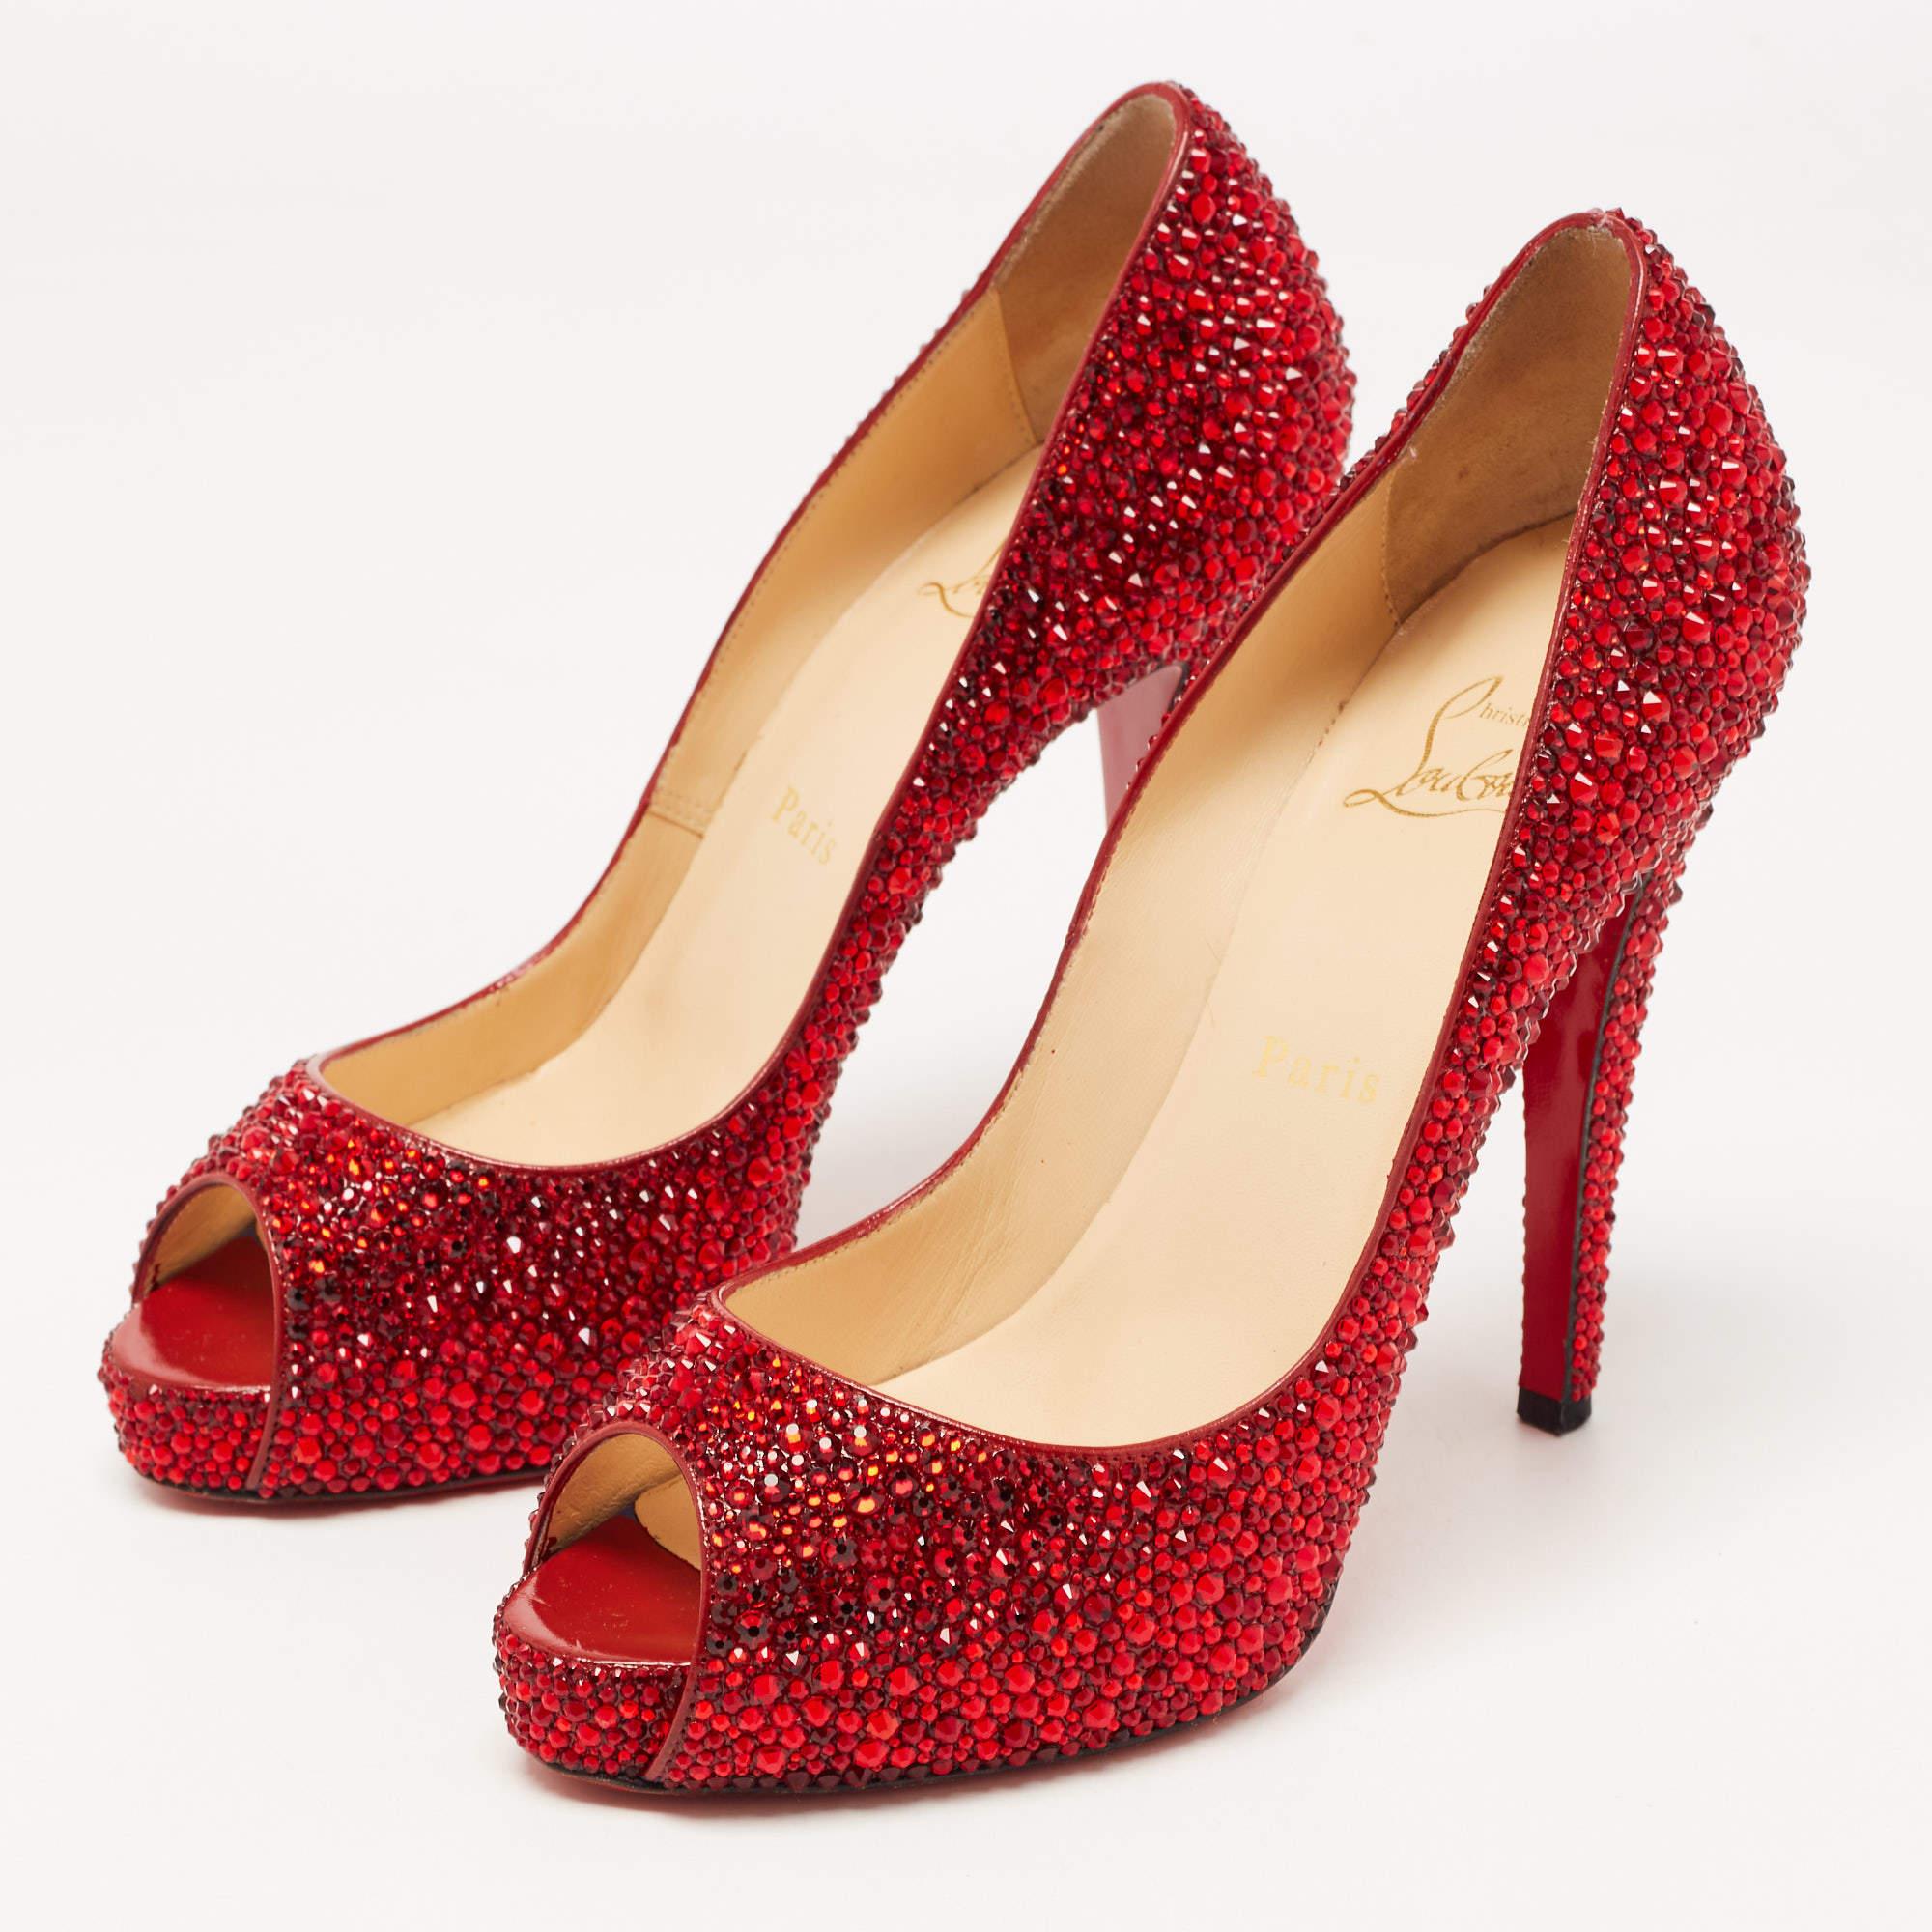 Women's Christian Louboutin Red Leather Strass Very Prive Pumps Size 37.5 For Sale